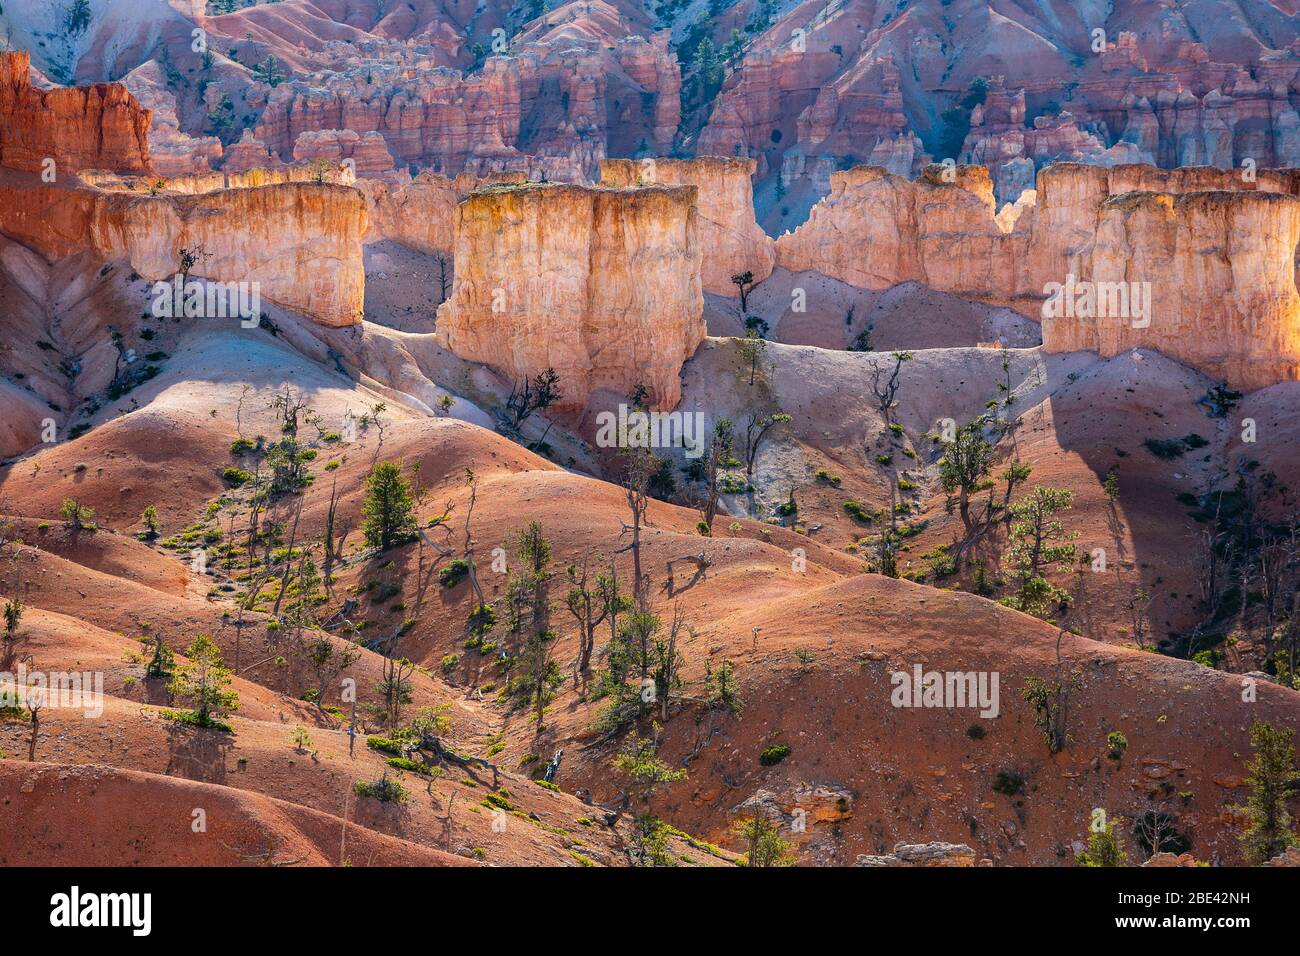 Dramatic scenery in Bryce Canyon National Park Stock Photo